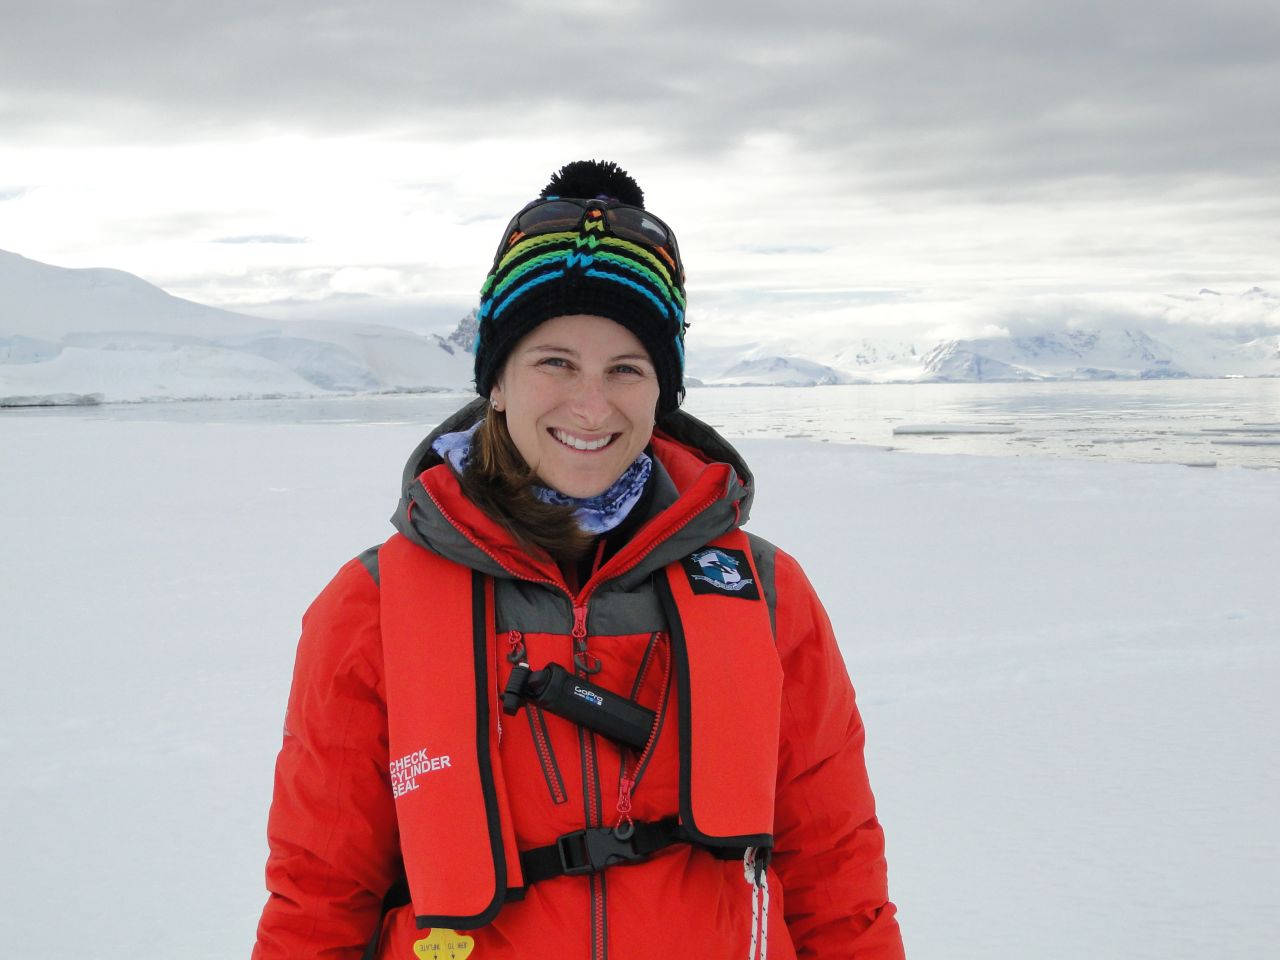 Population Modeler Deborah Pardo says she felt compelled to protect the planet after giving birth, and applied to be part of Homeward Bound. In this photo she is standing on ice, an experience she admits was frightening, as the ice quite literally cracks beneath your feet.